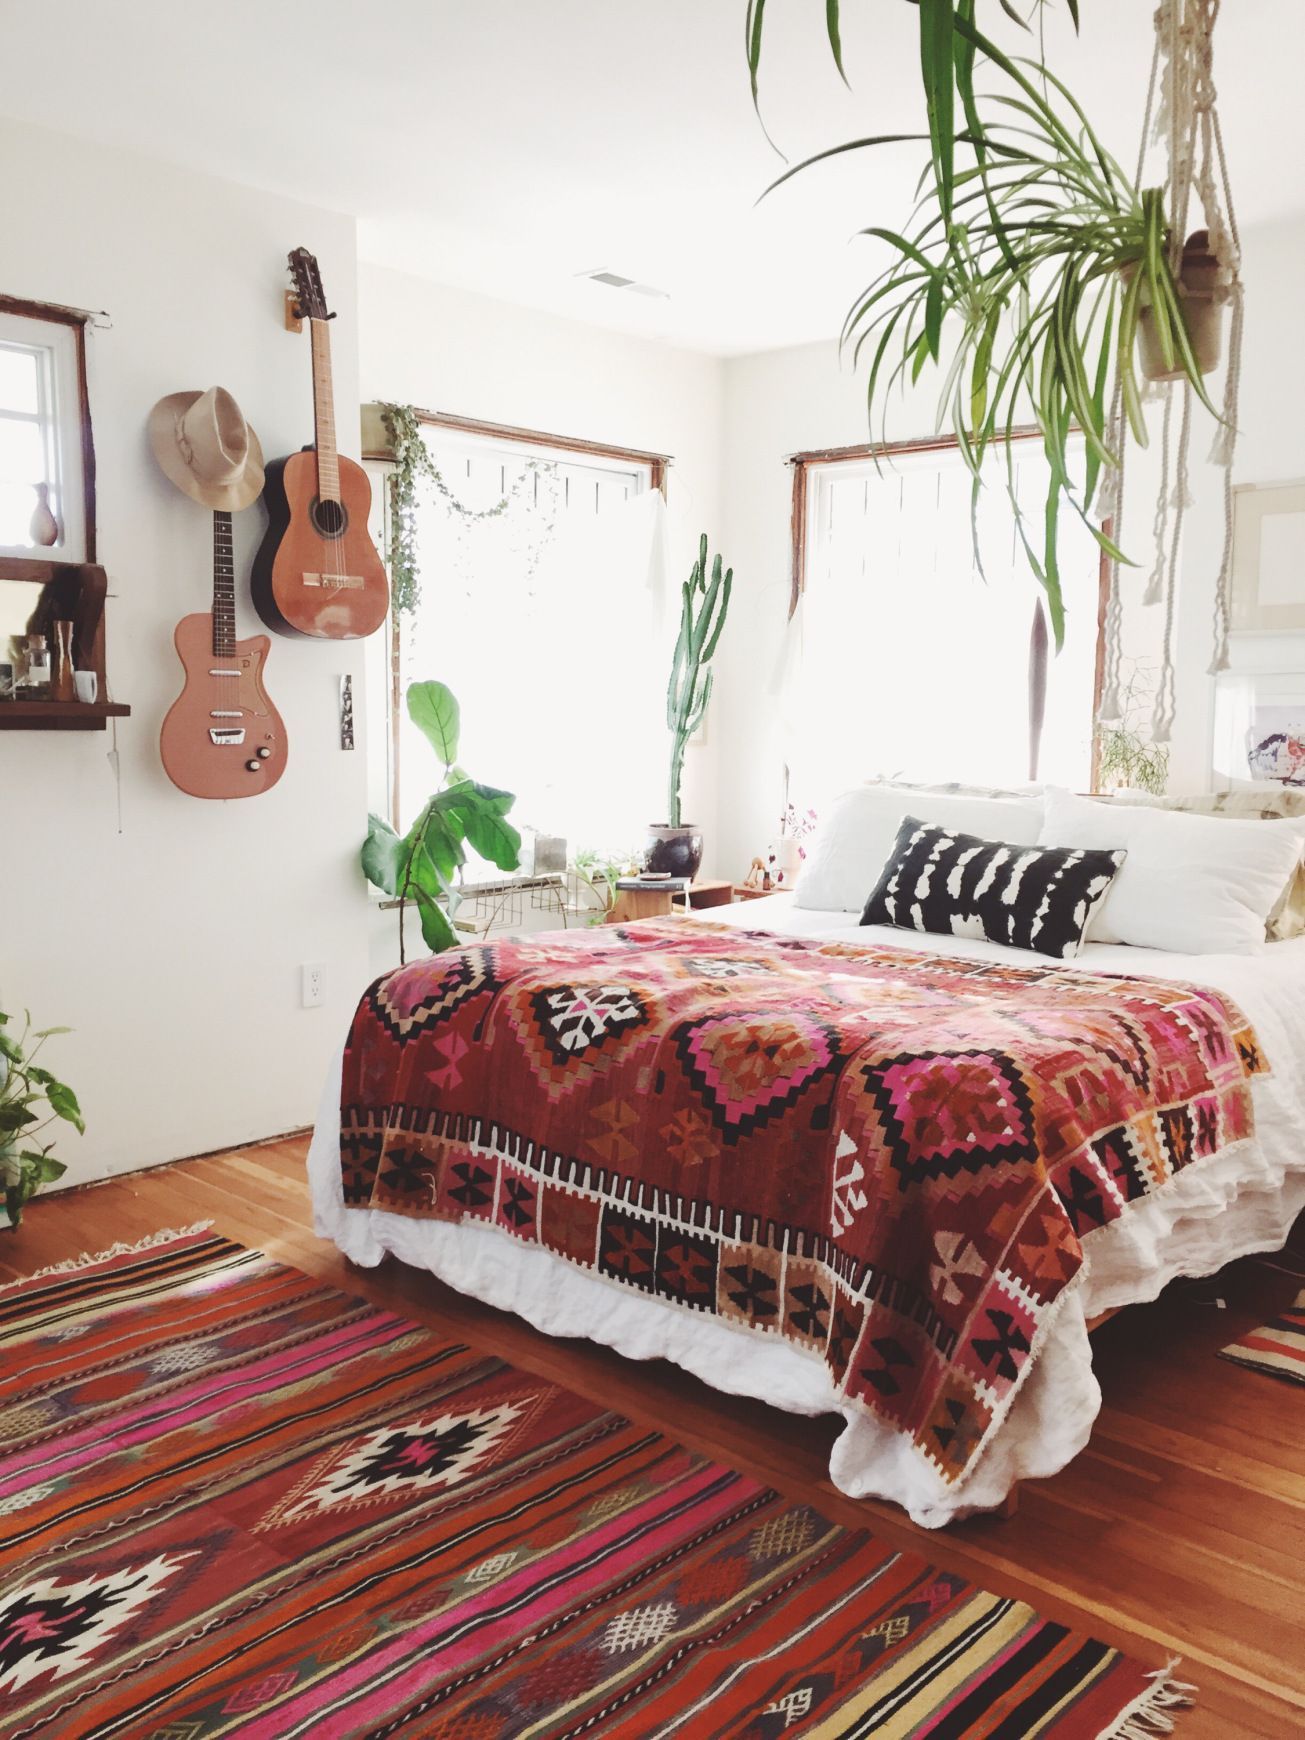 25 Bohemian Bedroom Decor Ideas That Will Make You Want to Redecorate ASAP | @STYLECASTER